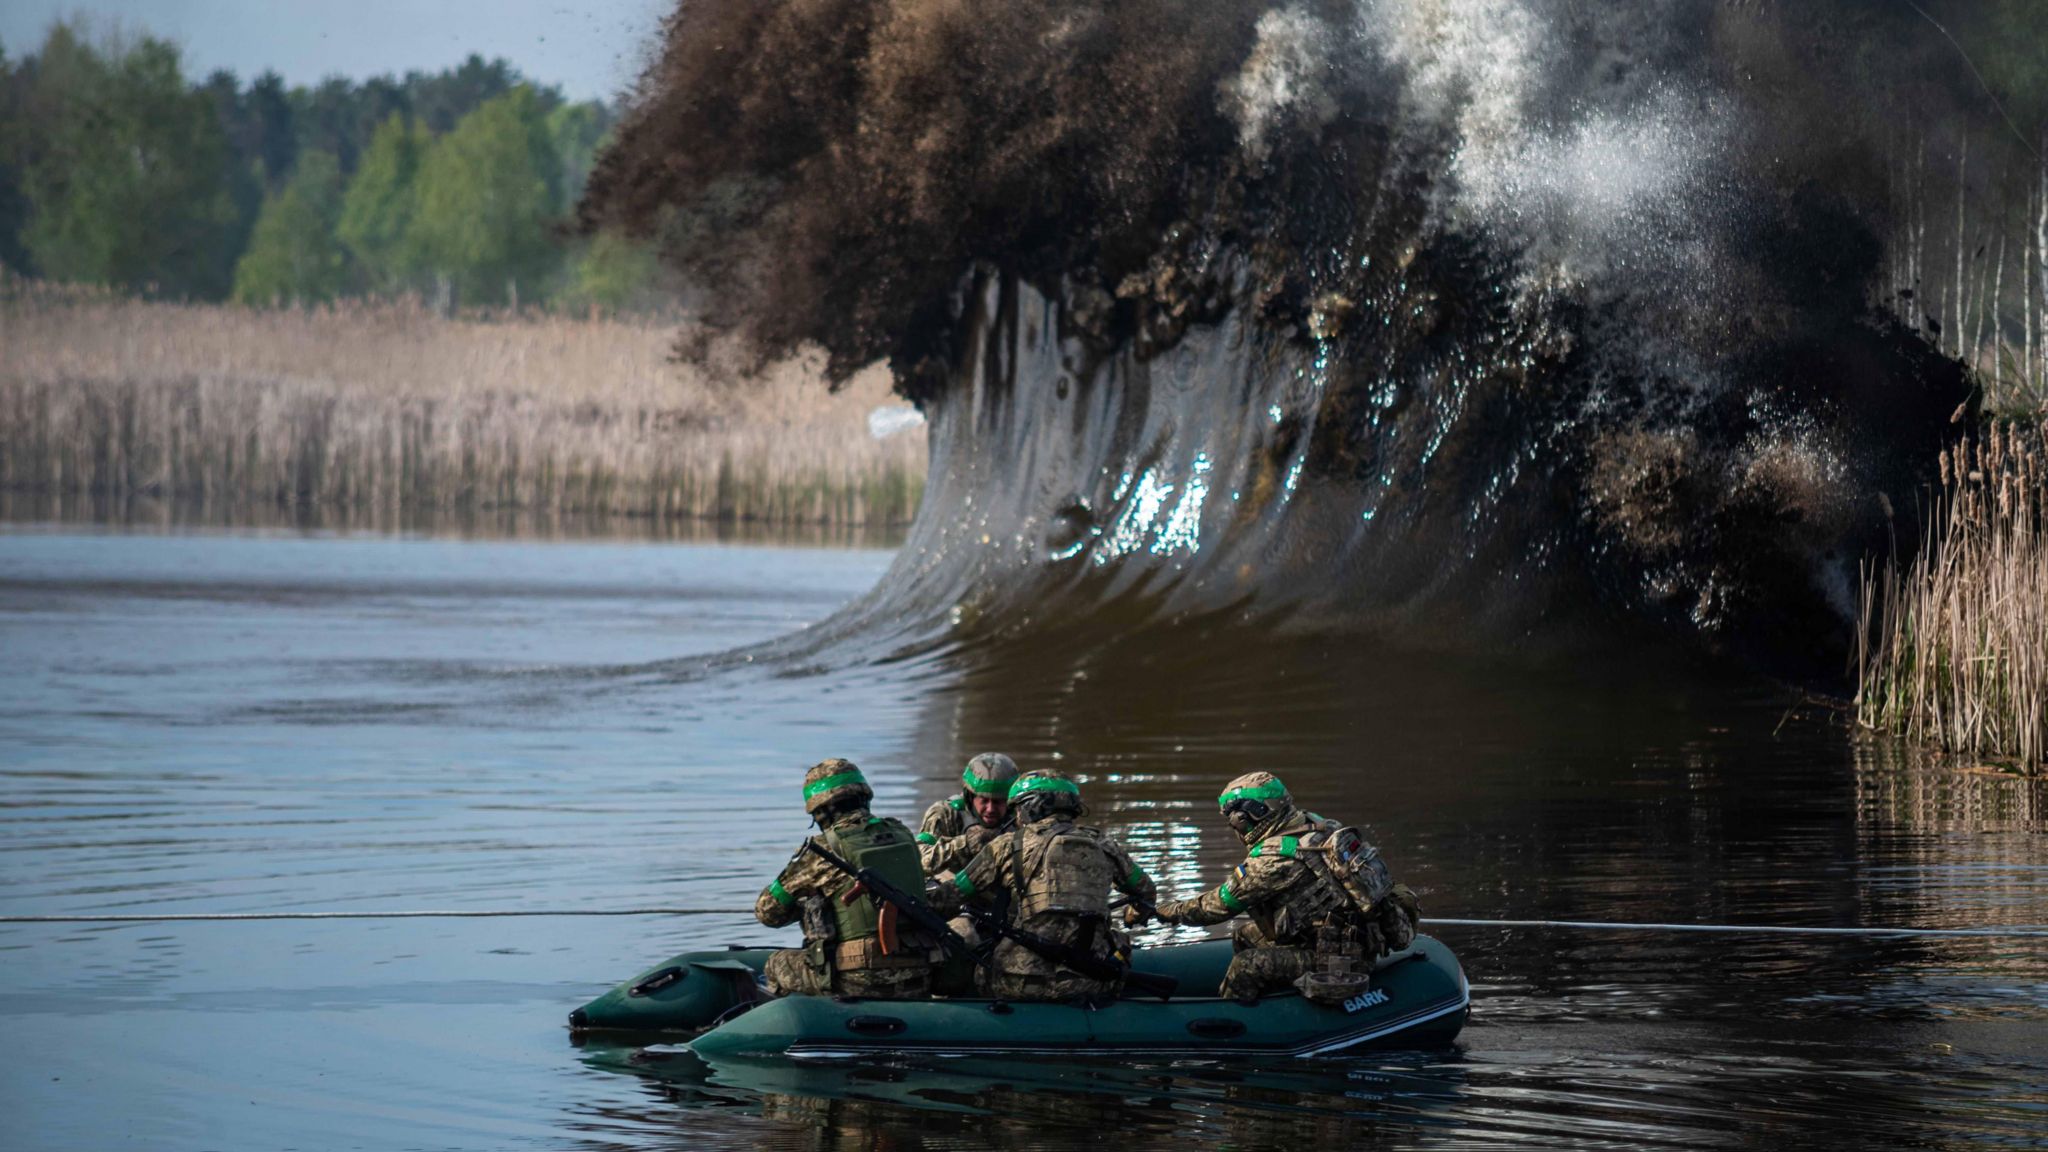 Soldiers bracing on a raft after an explosion hits the water